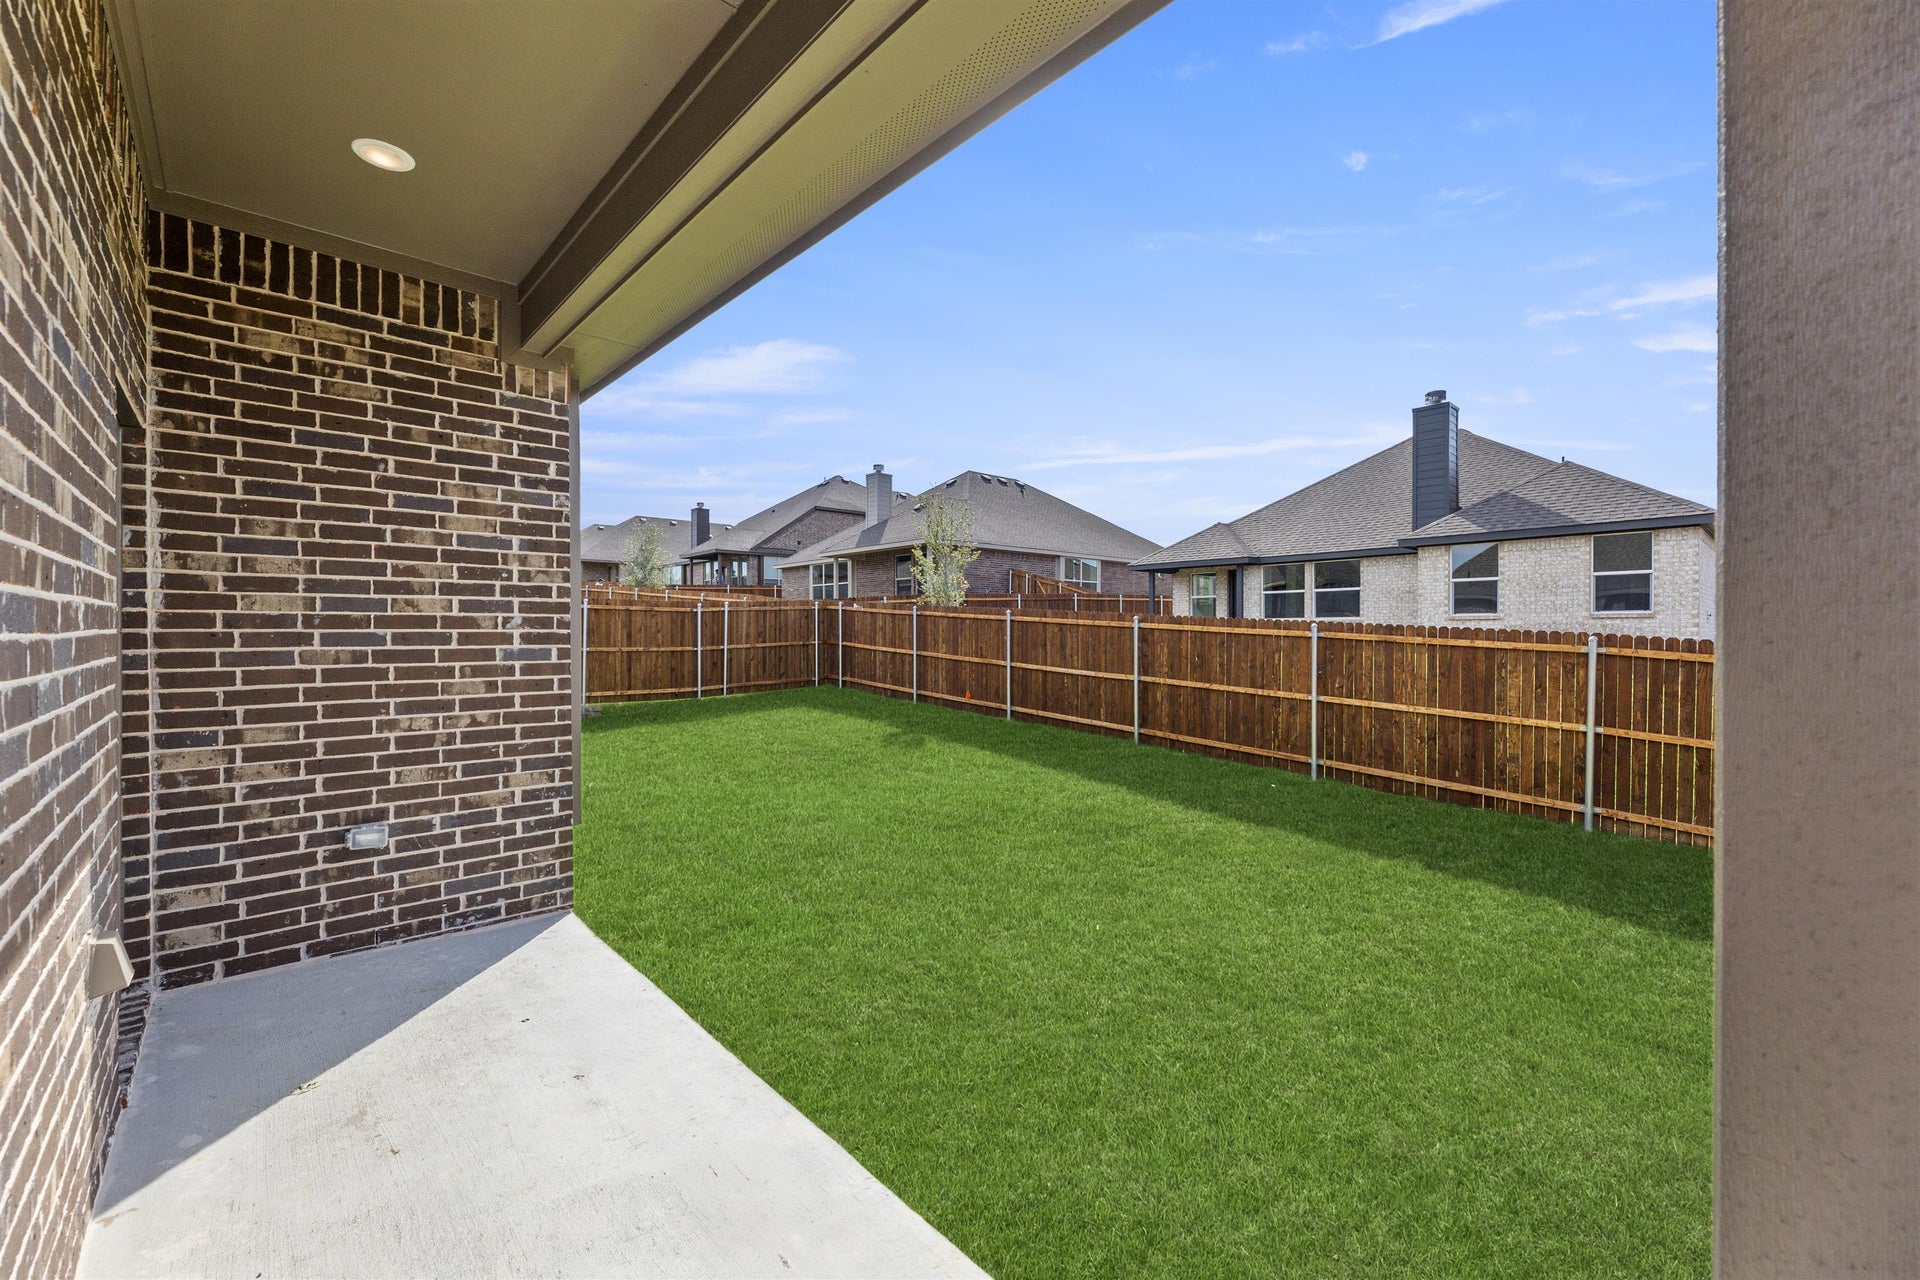 4br New Home in Weatherford, TX